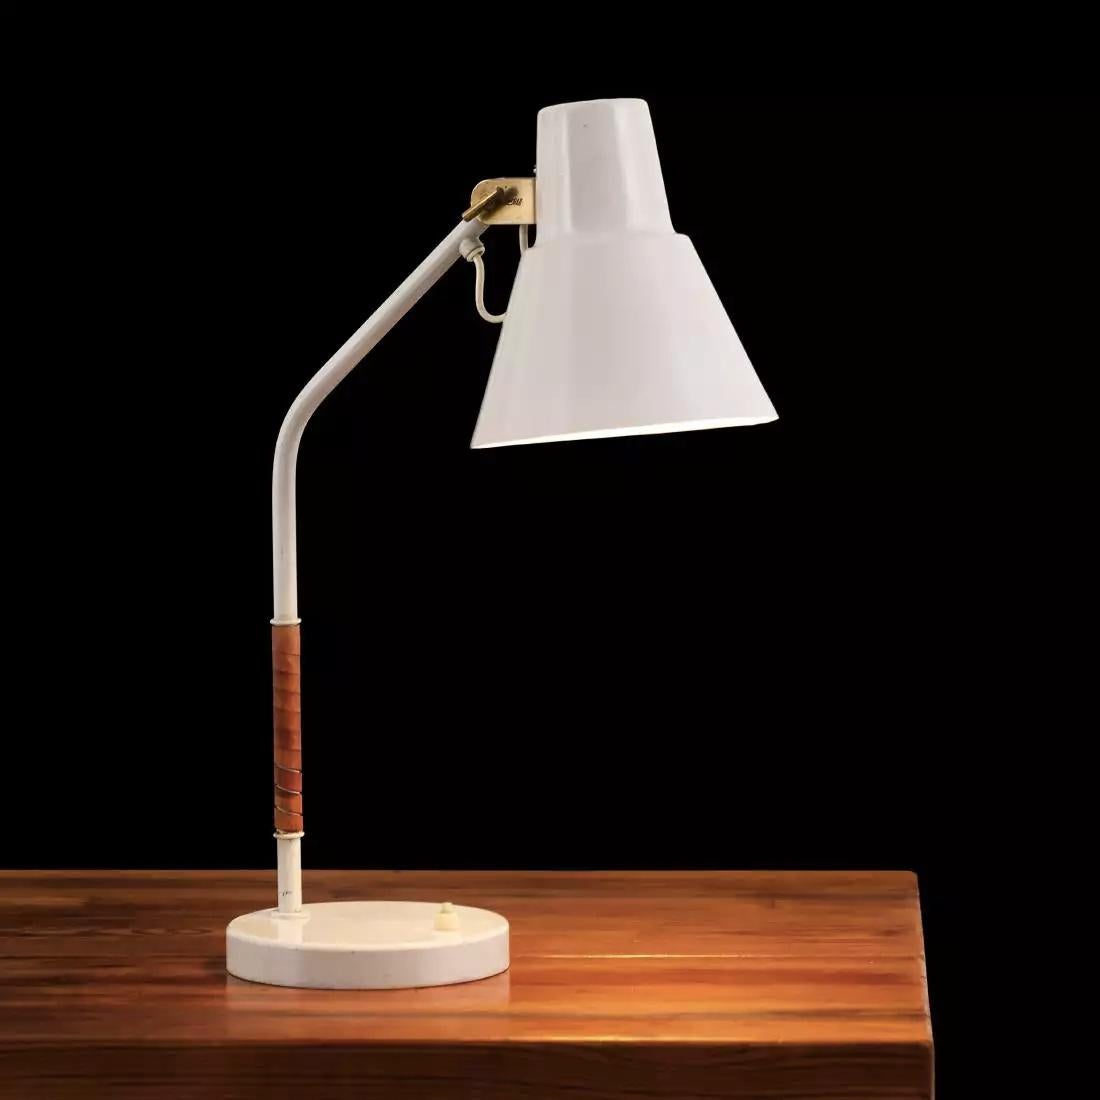 1950s Aarne Ervi 'AK 22' table lamp for Itsu. A rare and elegant table lamp executed in enameled metal, brass and leather. Shade is adjustable. A contemporary of Paavo Tynell, the refined work of Aarne Ervi has made him an increasingly valued